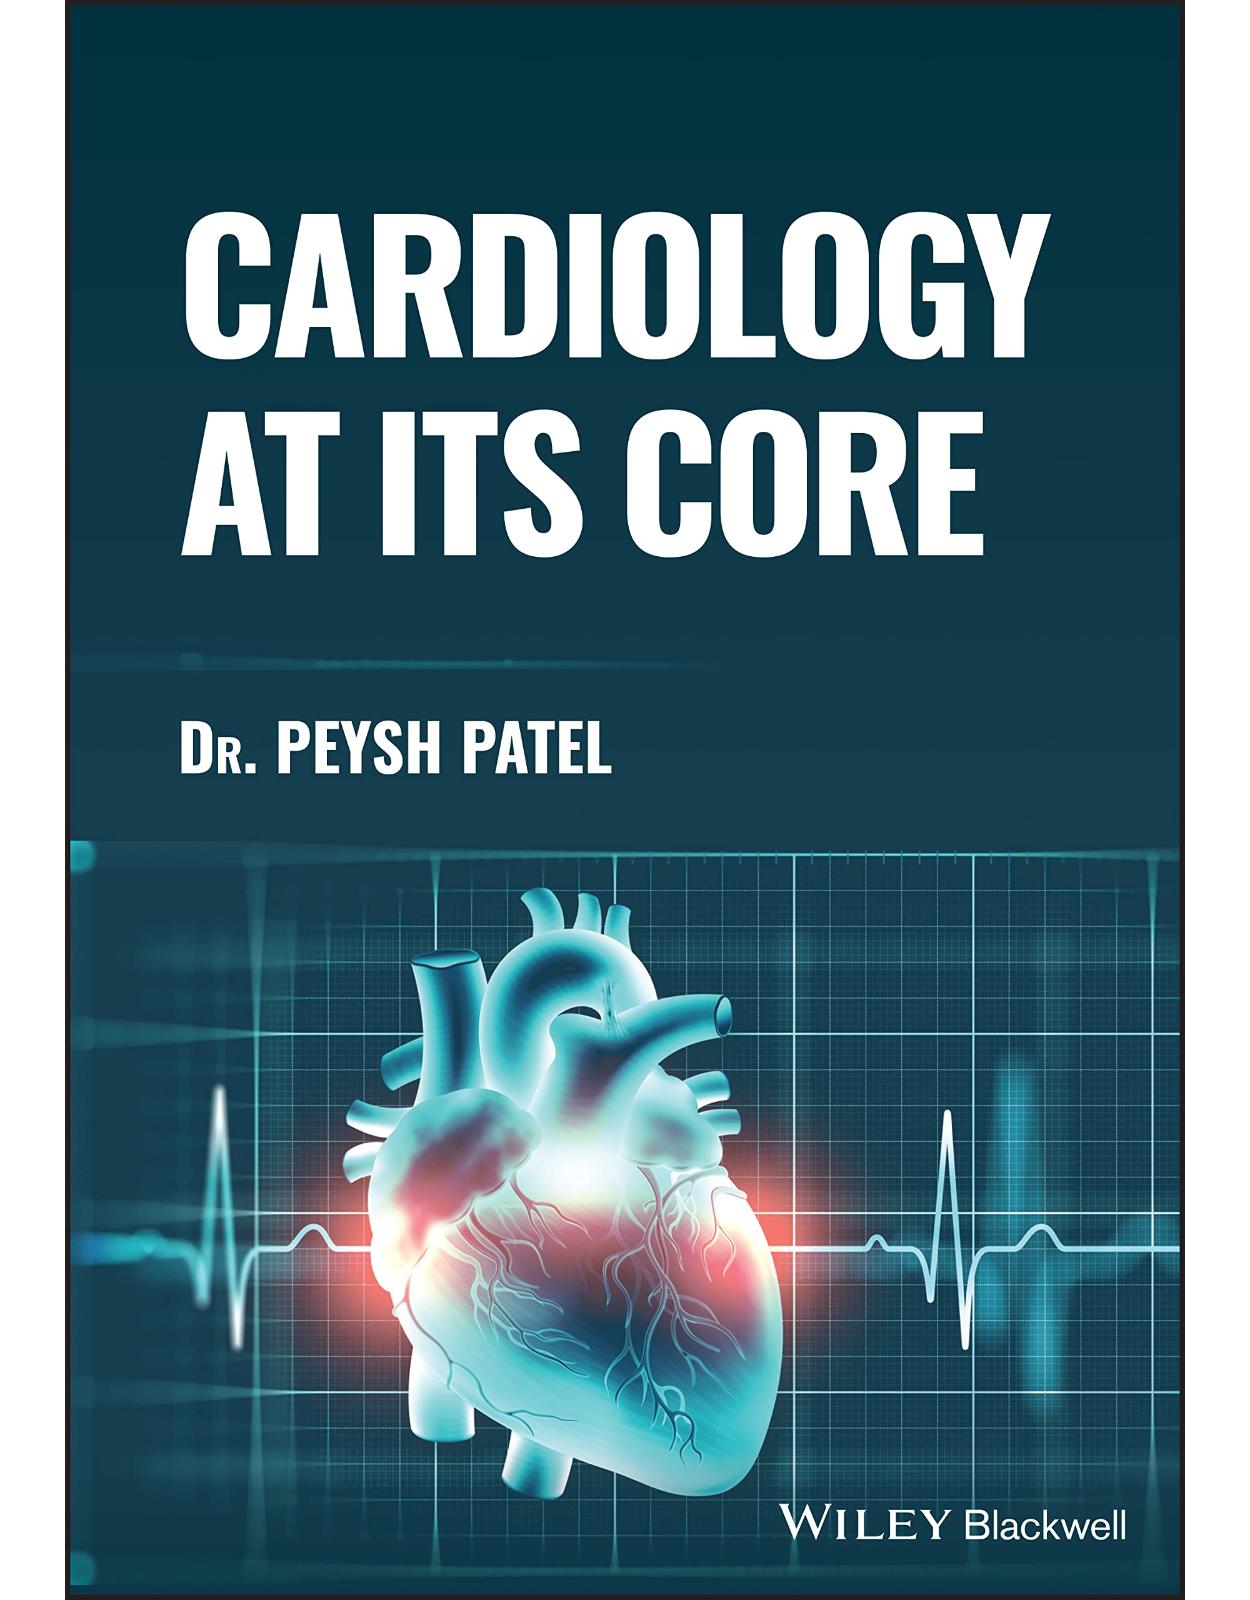 Cardiology at its Core